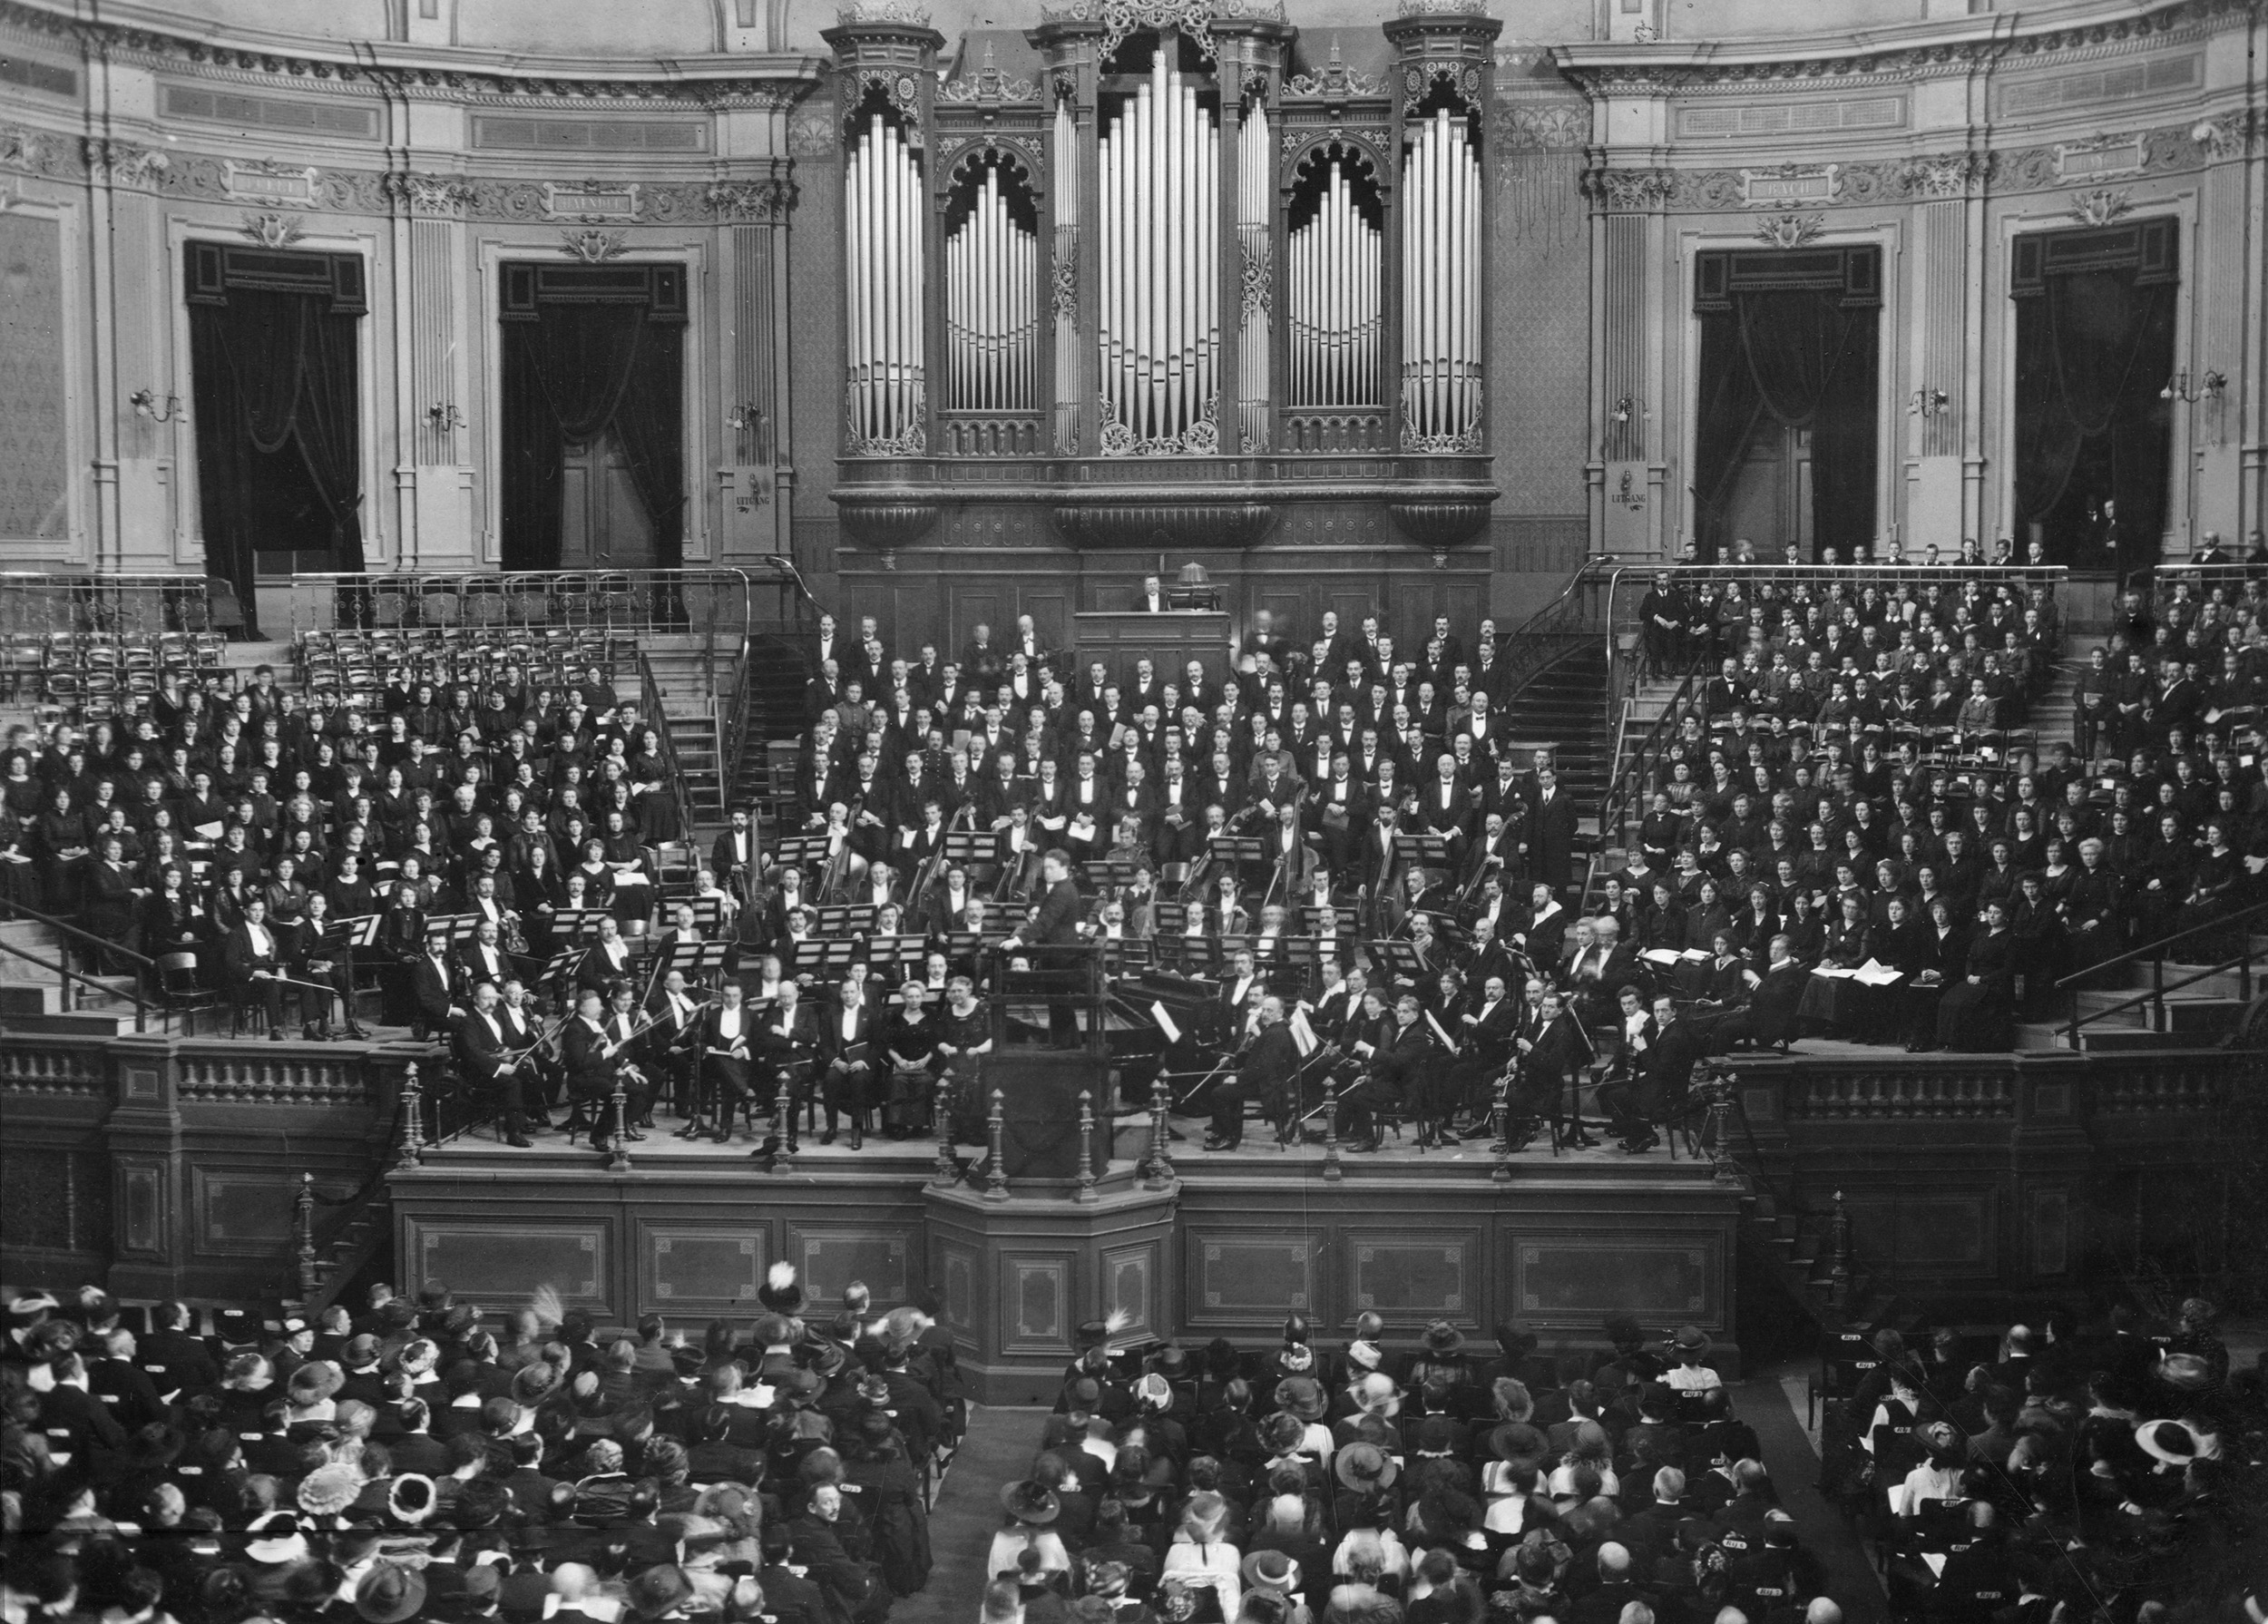 1916 The Concertgebouworkest performs Bach’s St Matthew Passion under the direction of Willem Mengelberg to open Easter week.